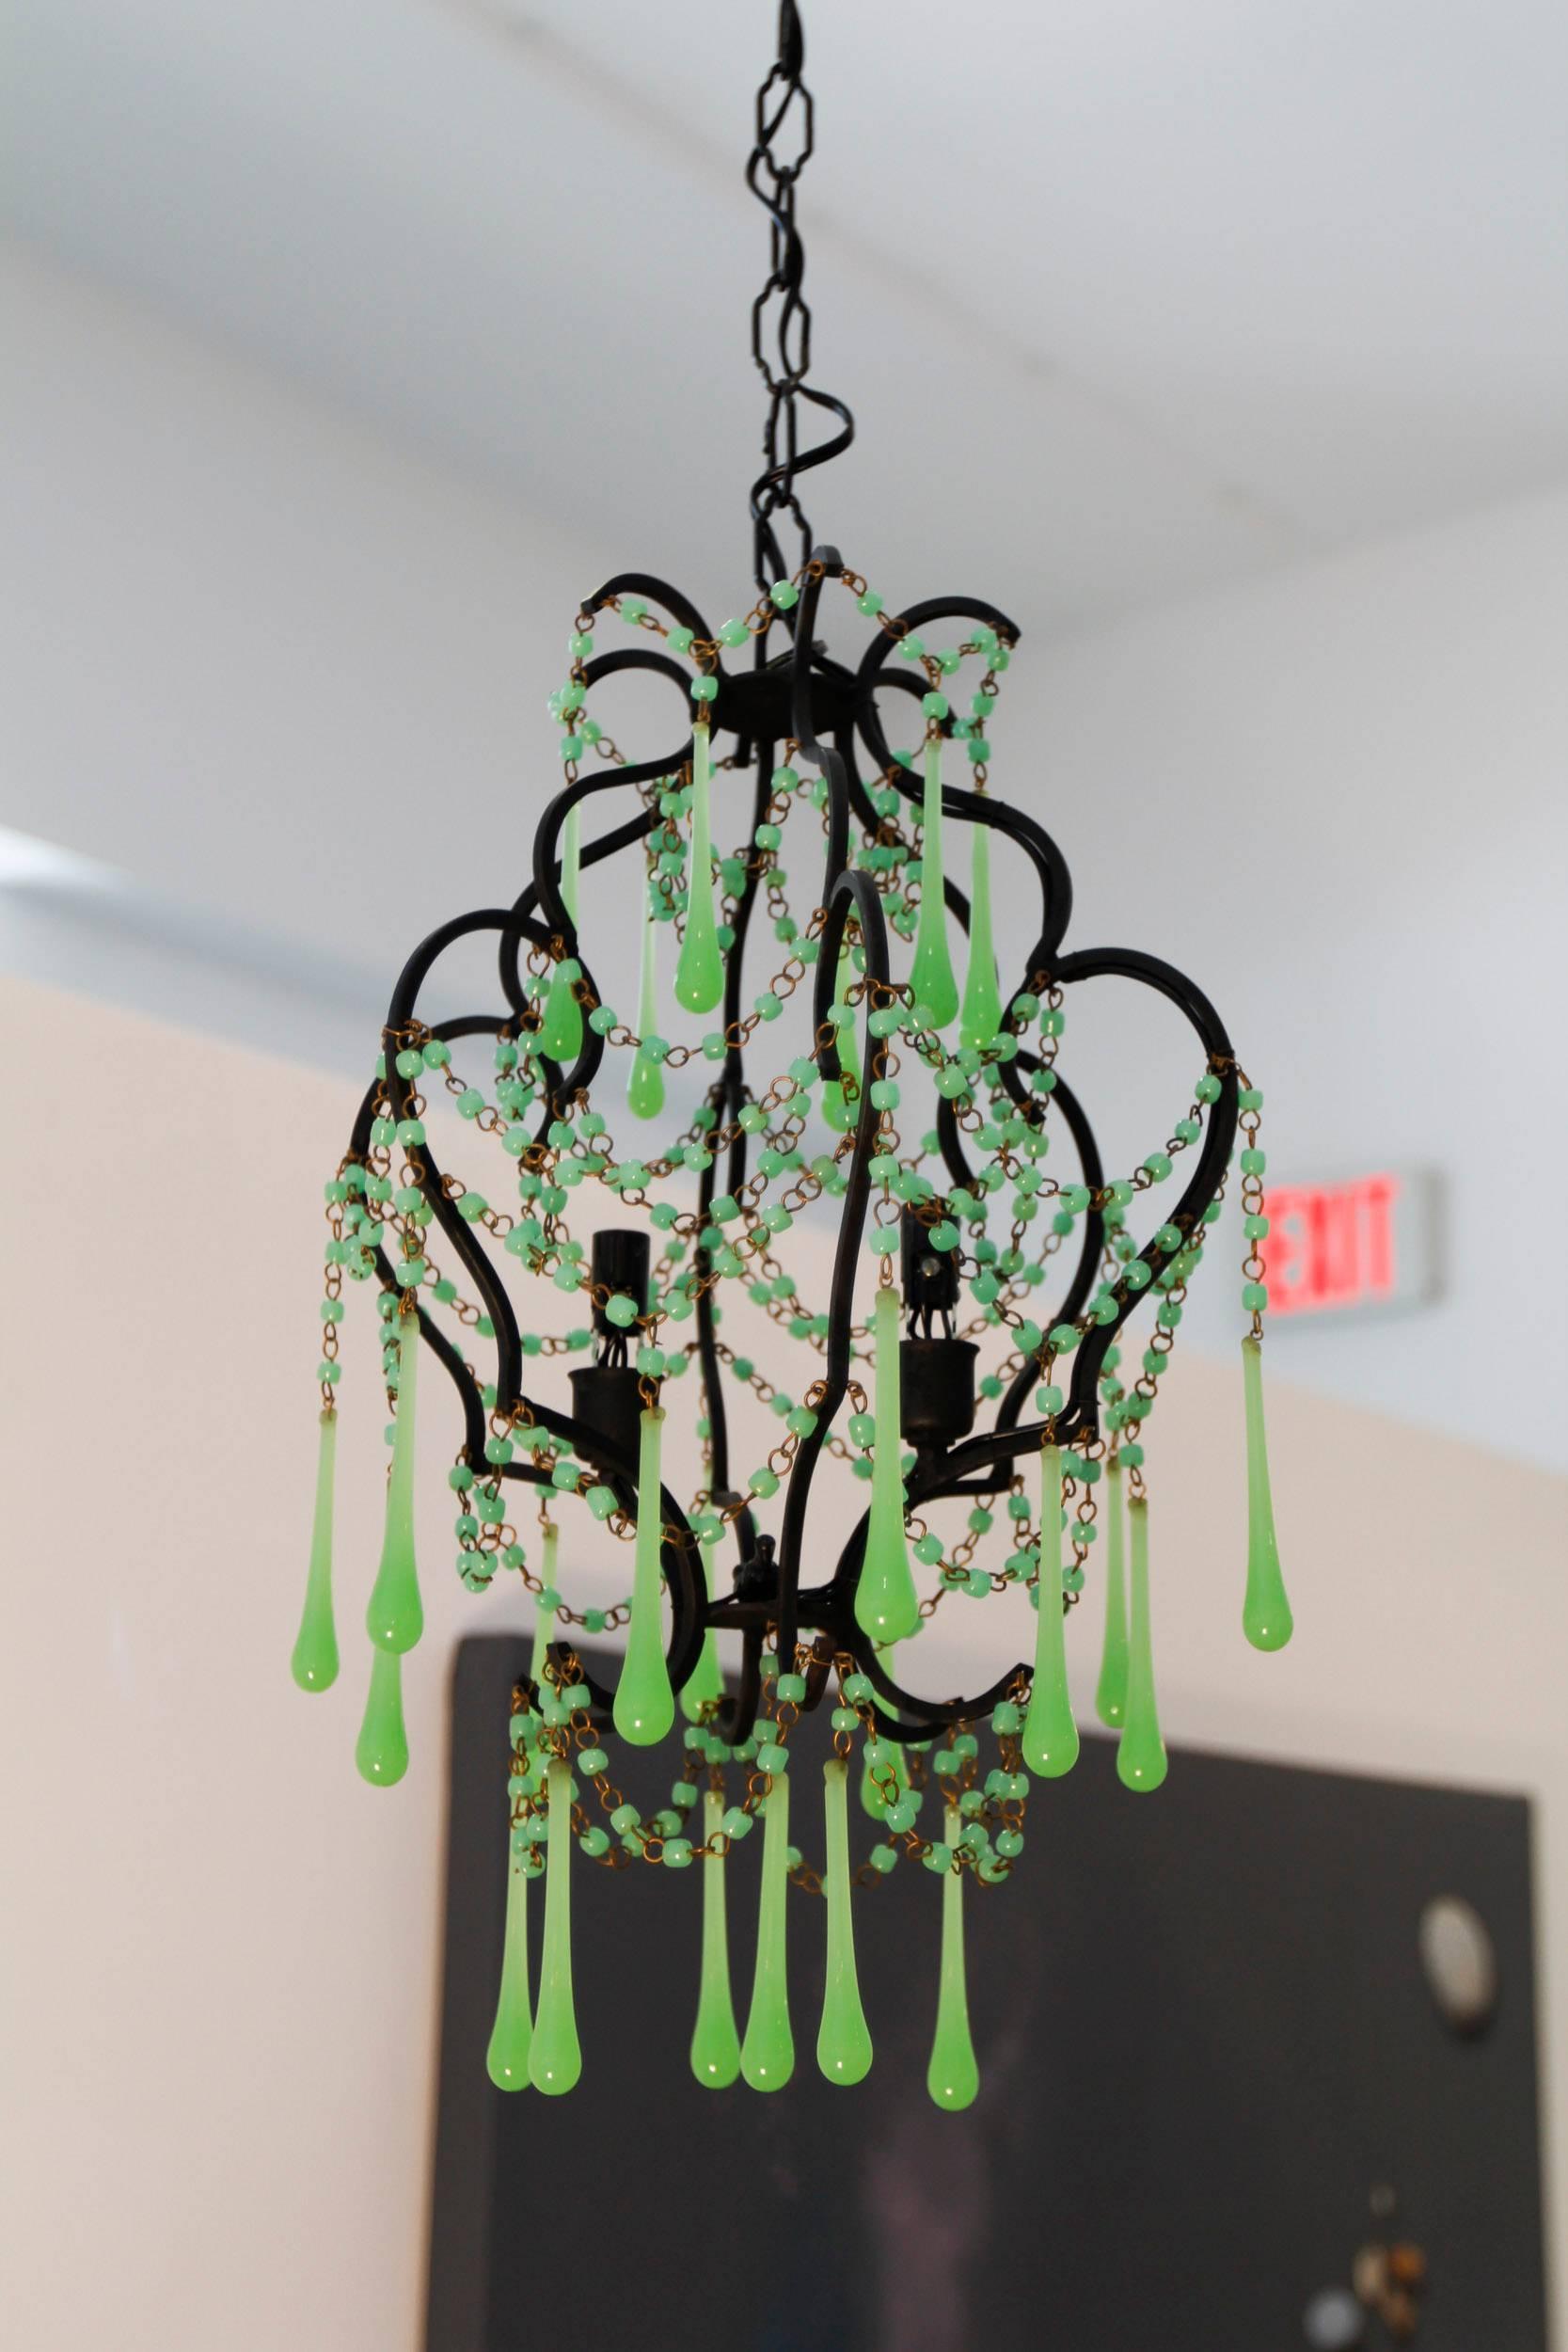 Pair of opaline chandeliers with jade green elongated drops. The chandeliers are sold as the pair. The frames are painted flat black.
Measure: 21